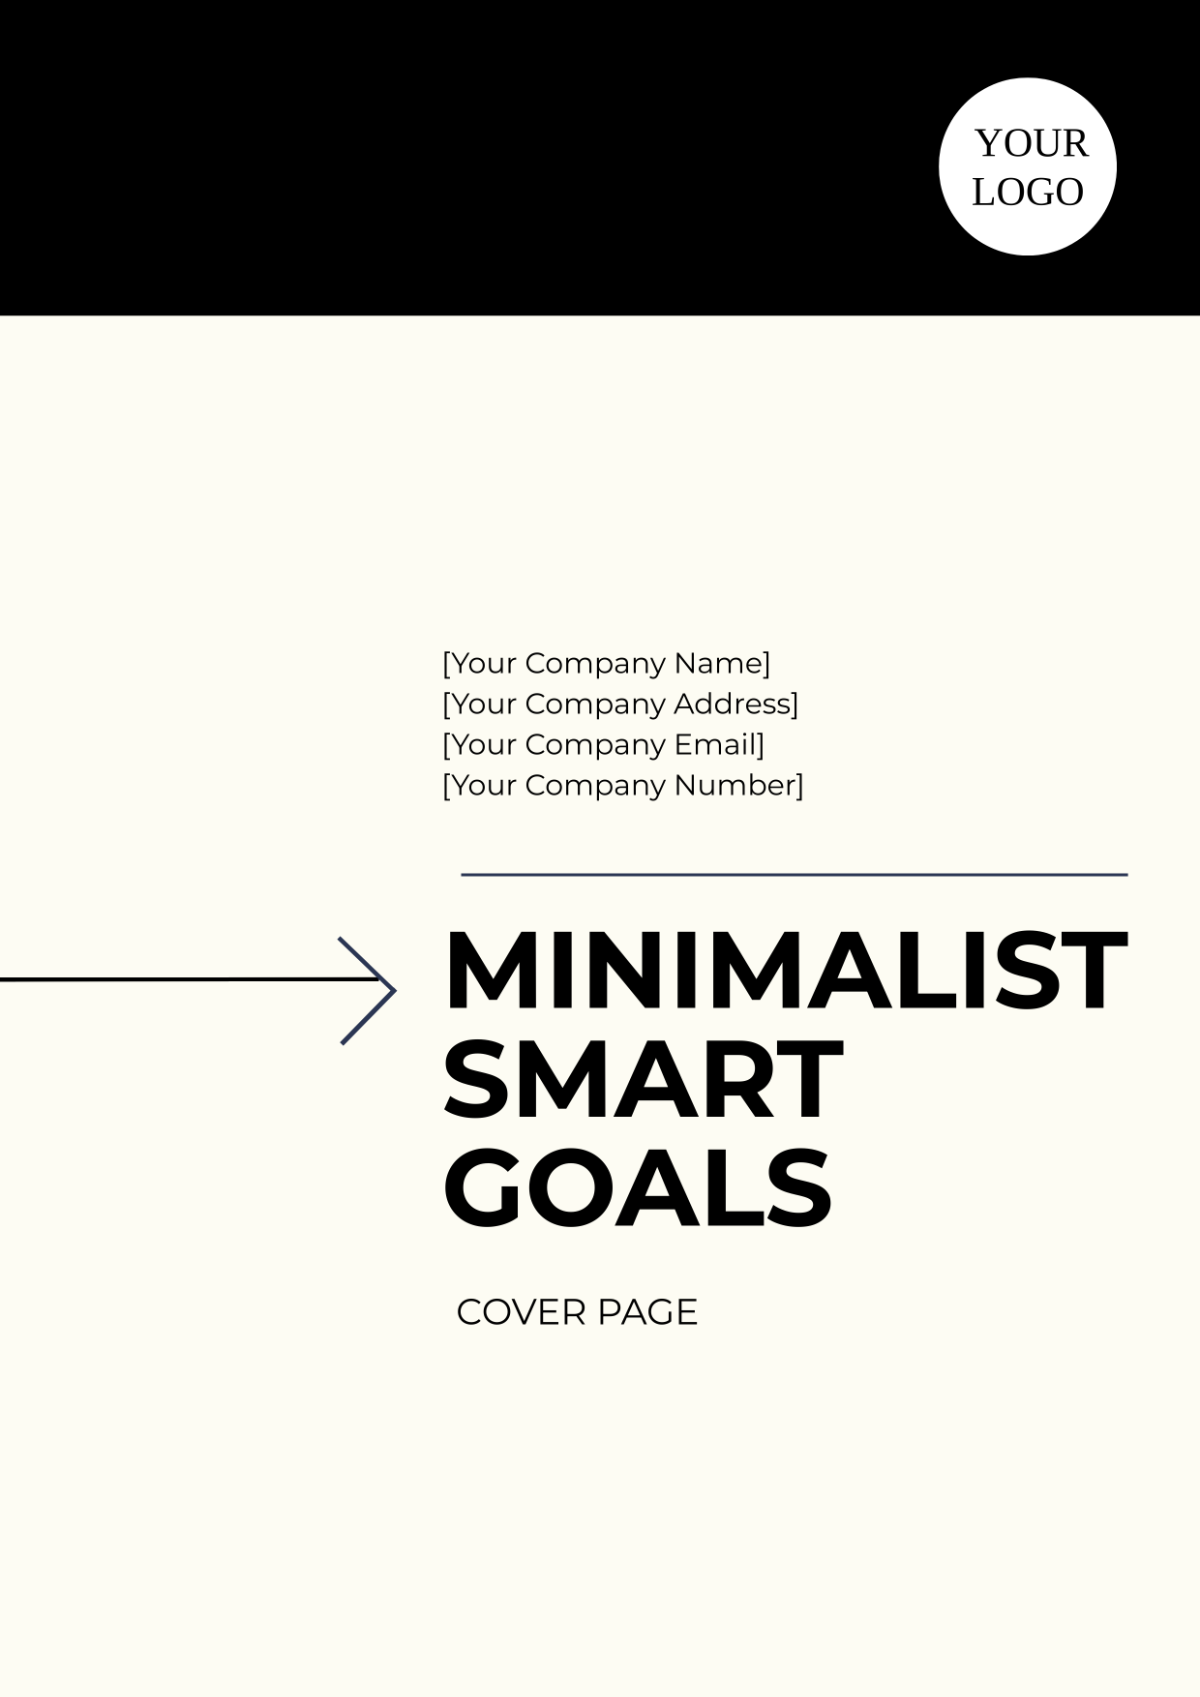 Minimalist SMART Goals Cover Page